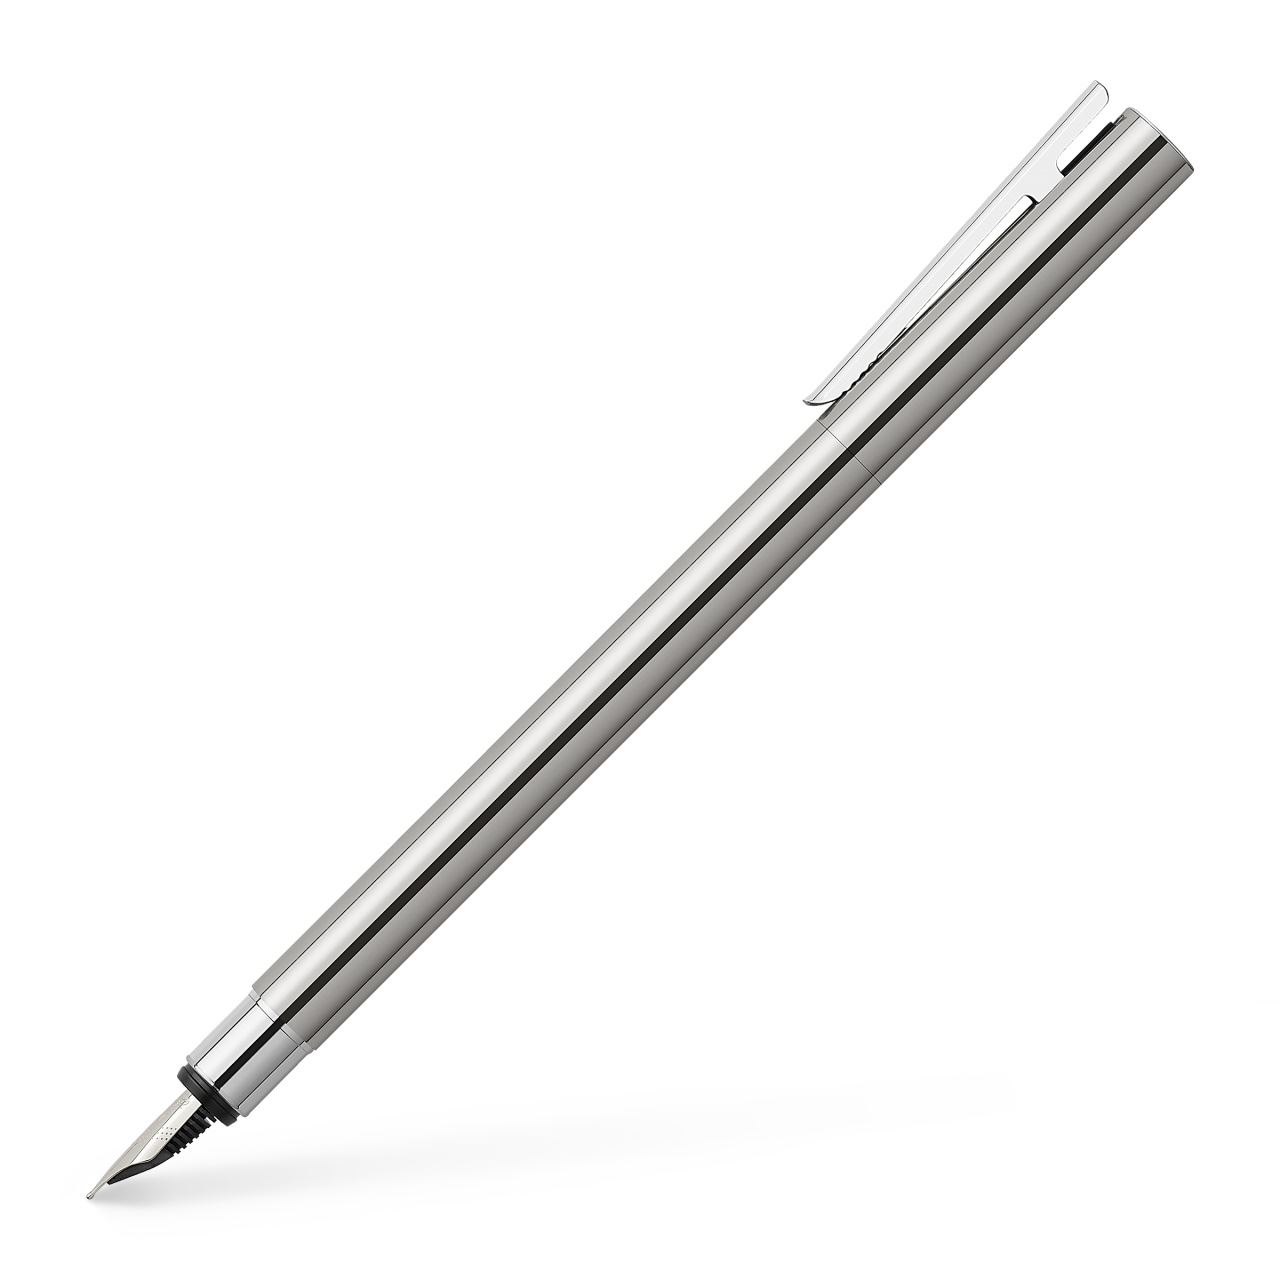 Faber-Castell - Neo Slim Stainless Steel fountain pen, F, silver shiny